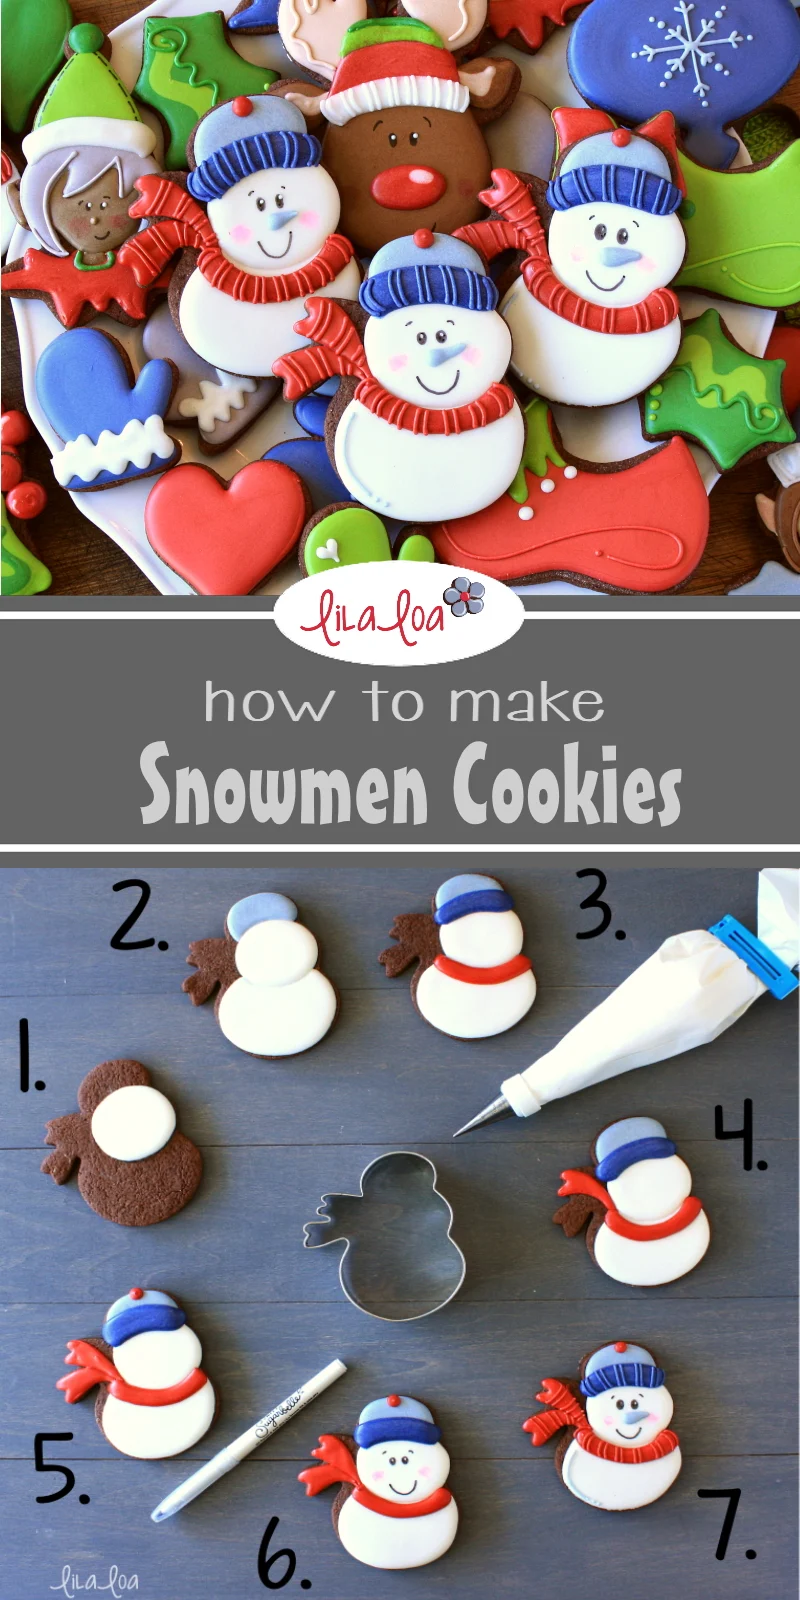 How to make decorated snowman sugar cookies a step by step tutorial